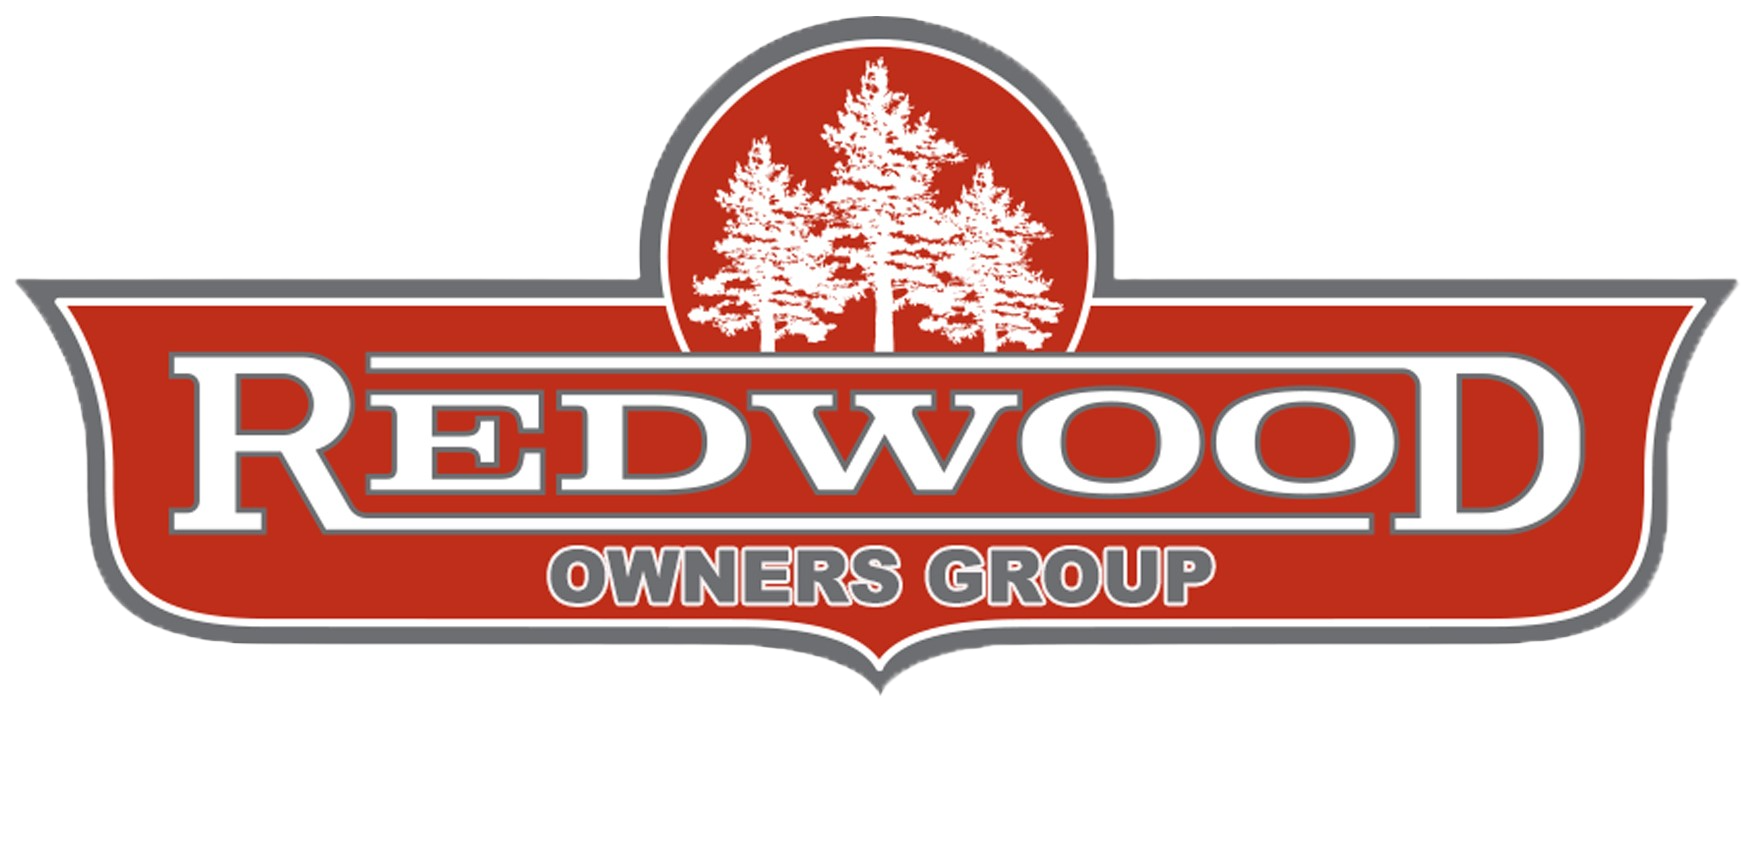 Redwood Owners Group